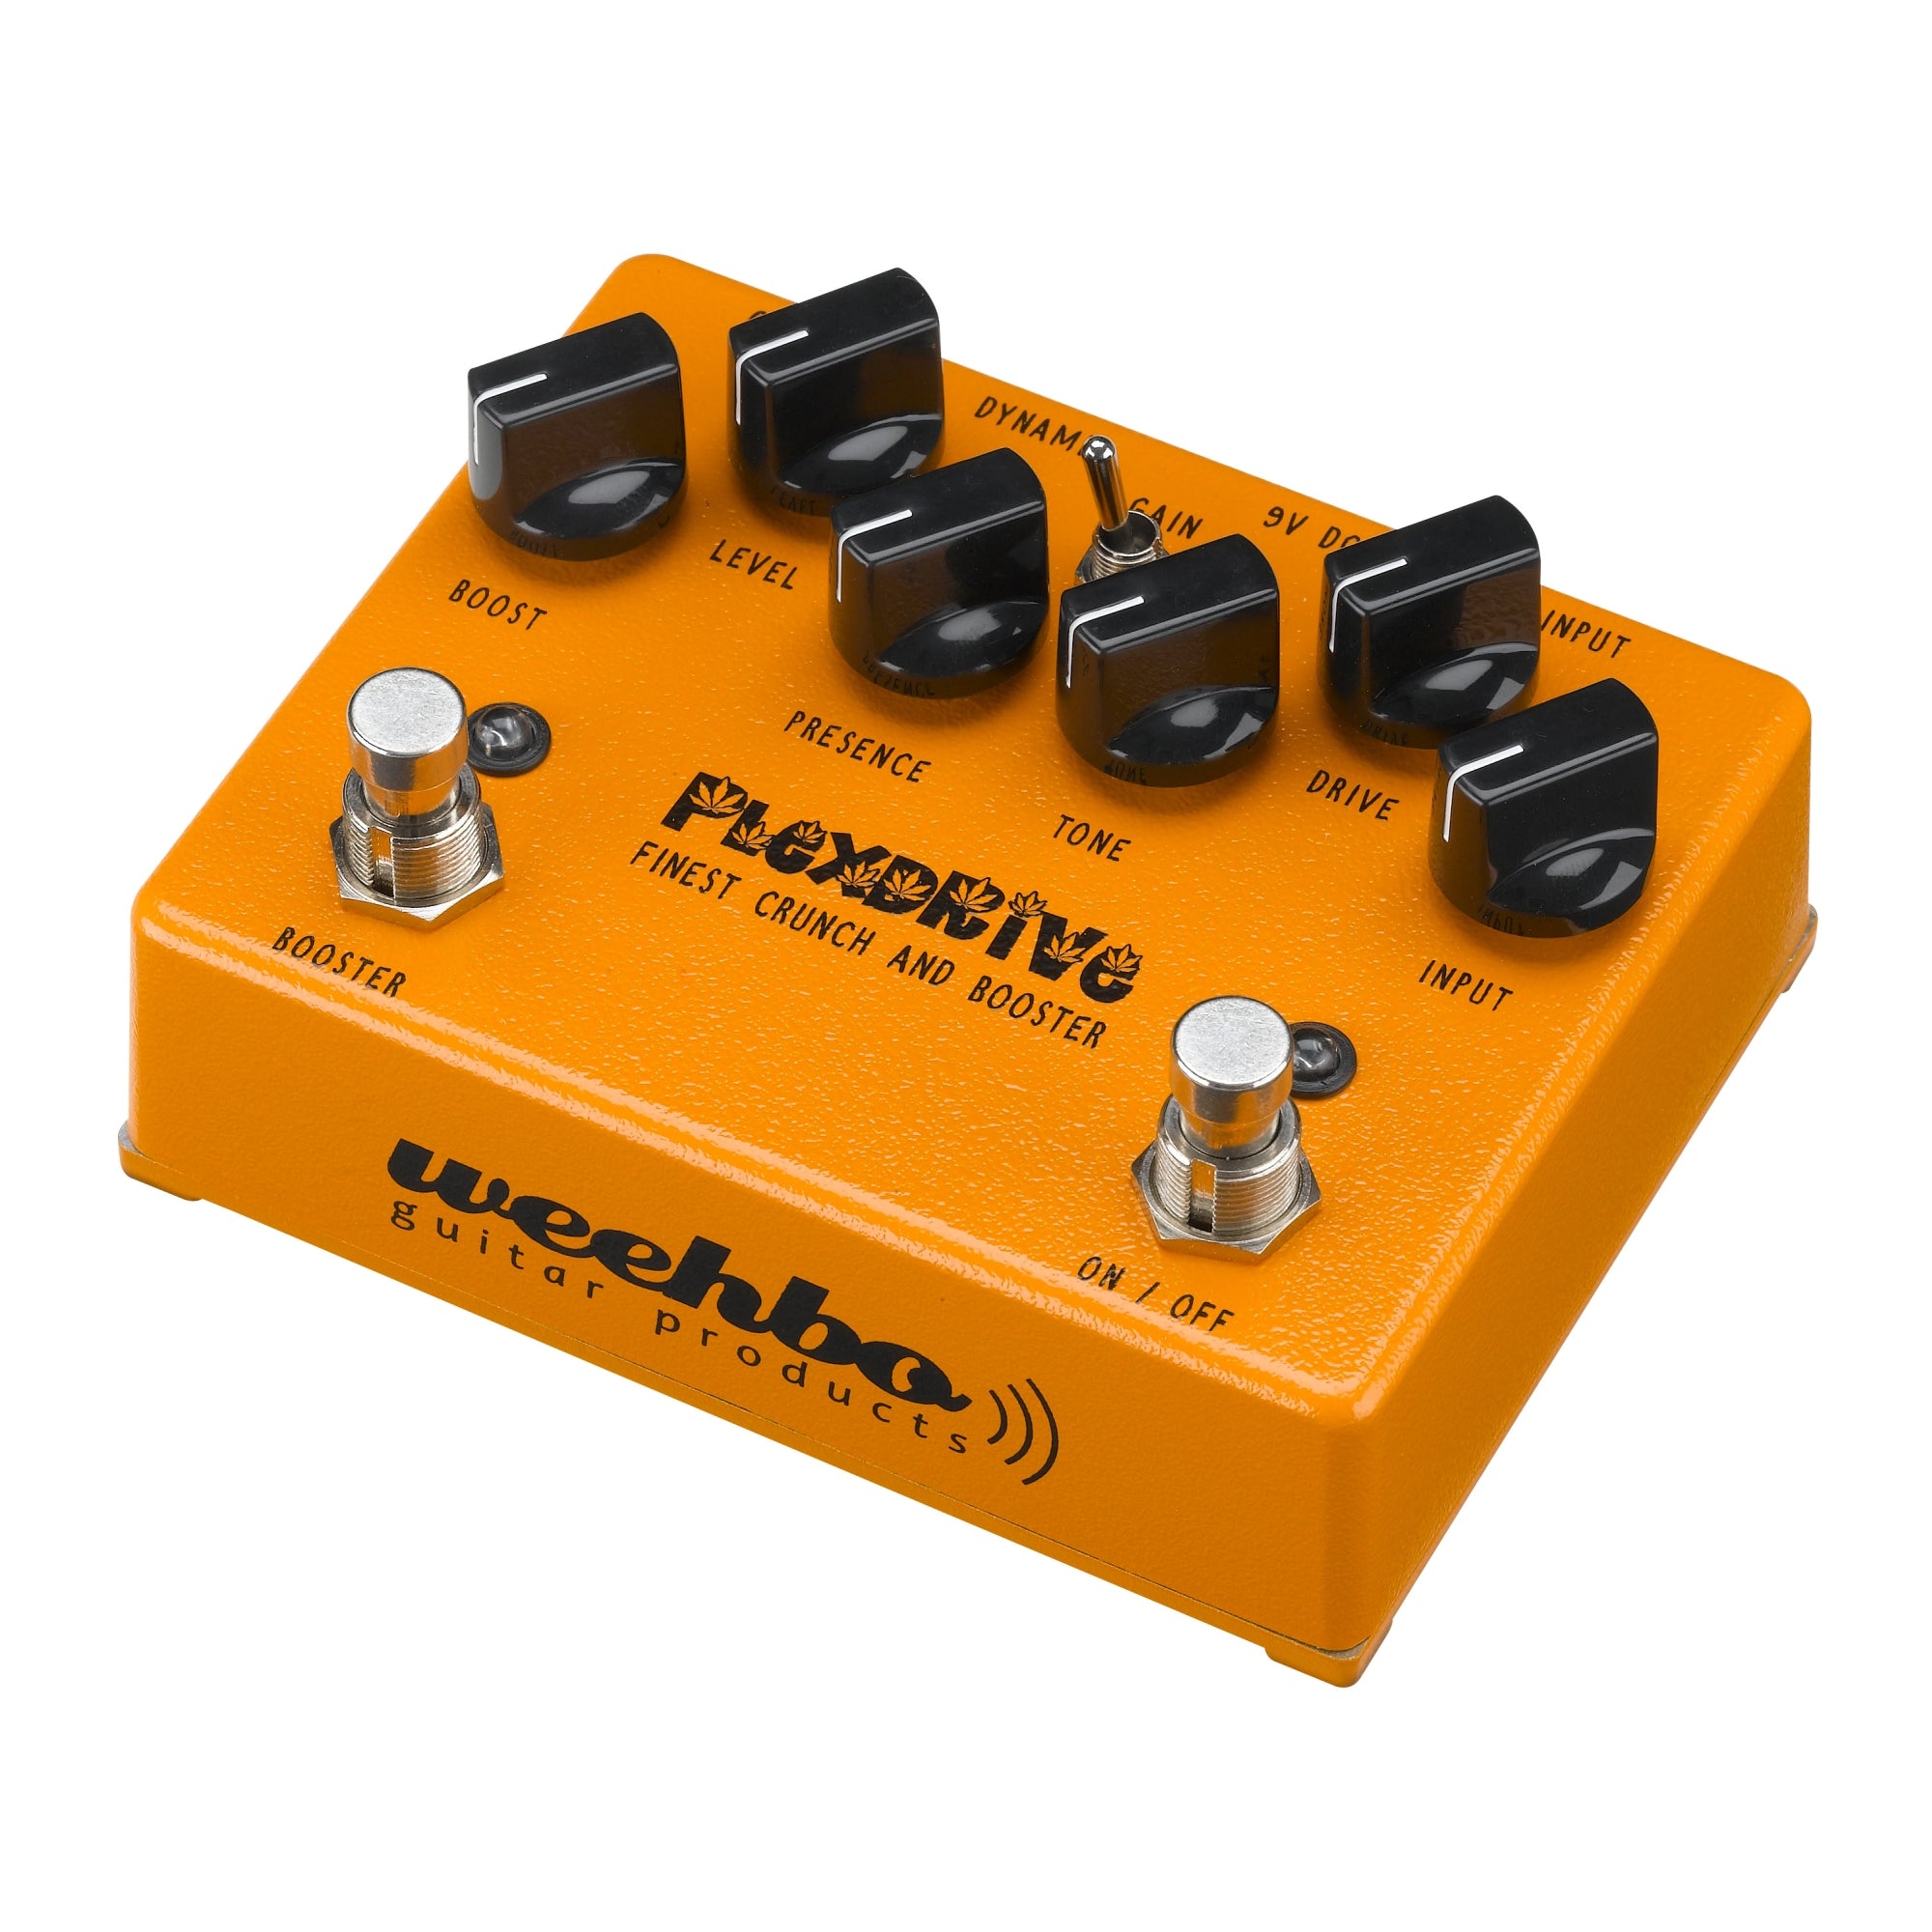 PLEXDRIVE - Finest Crunch and Booster | WEEHBO Guitar Products